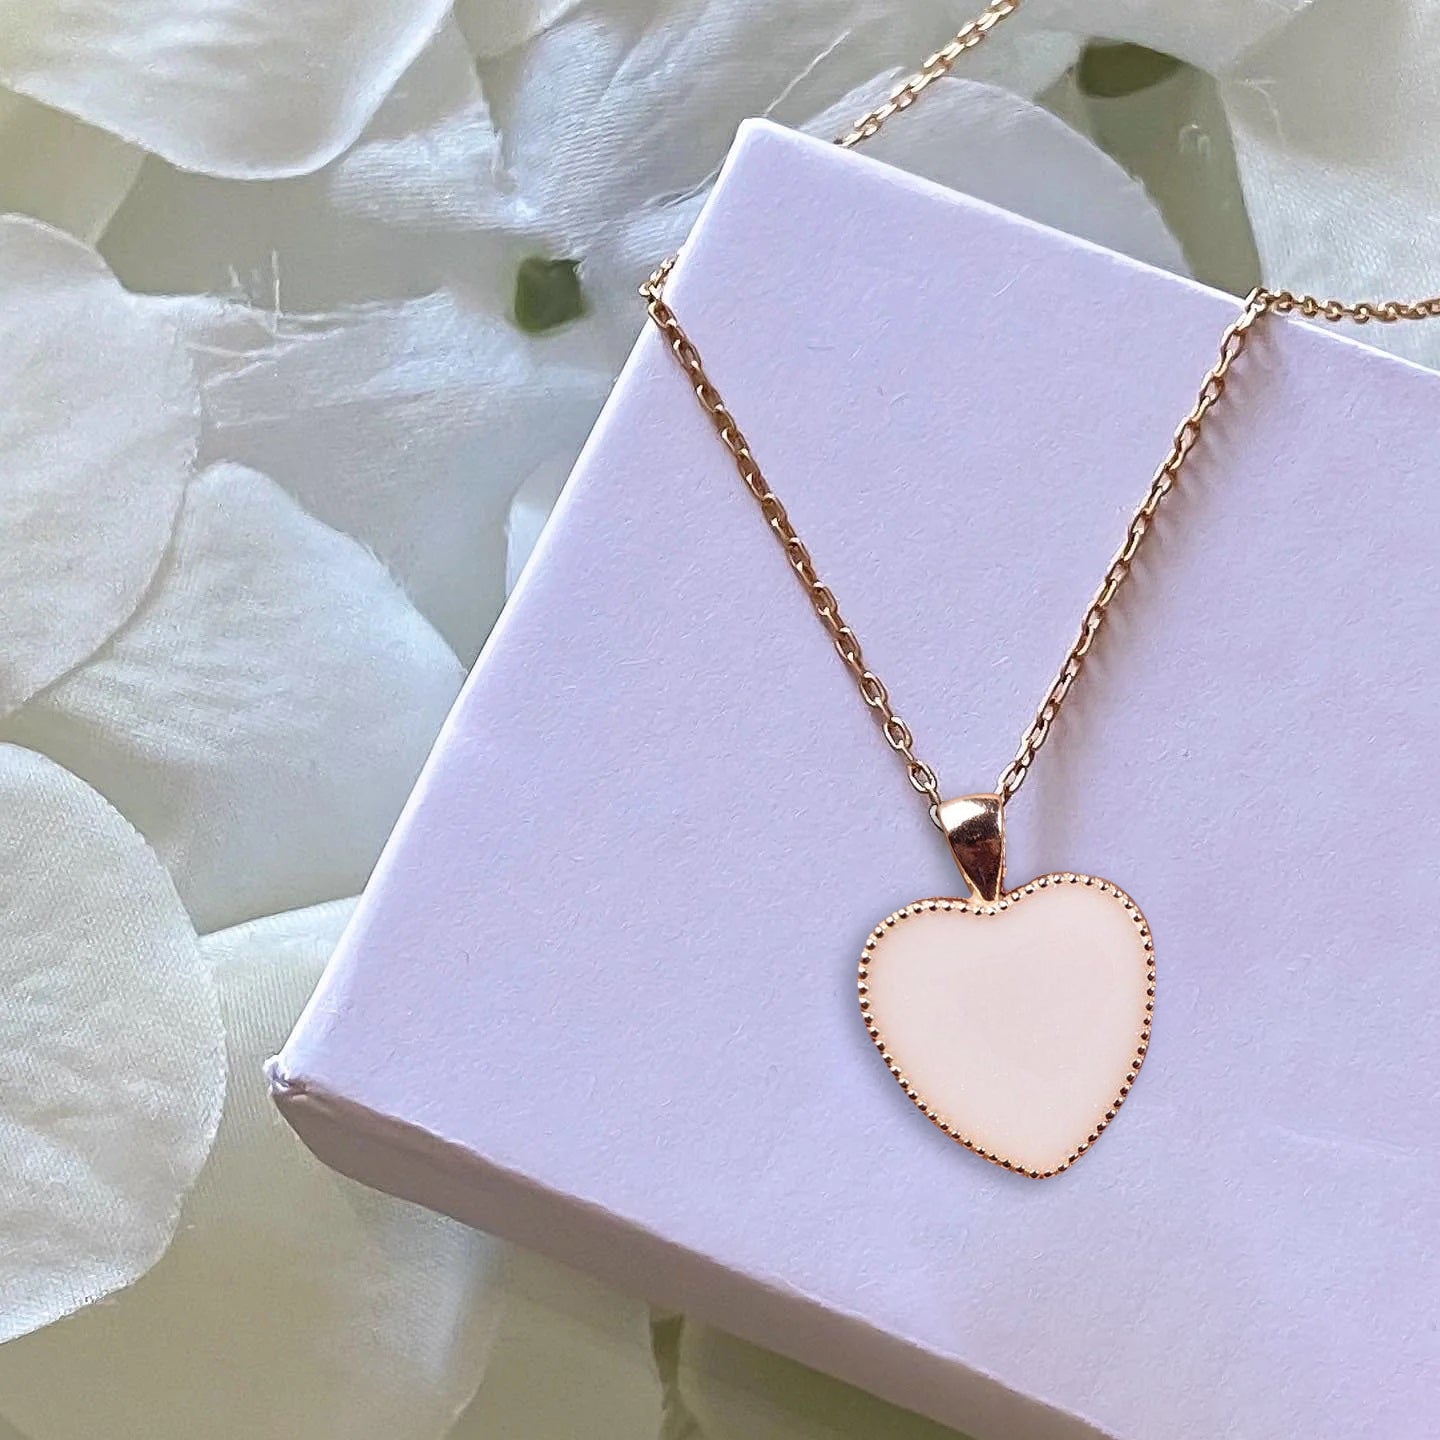 Rosegold Heart Royal Pendant with Breastmilk Jewelry Kit